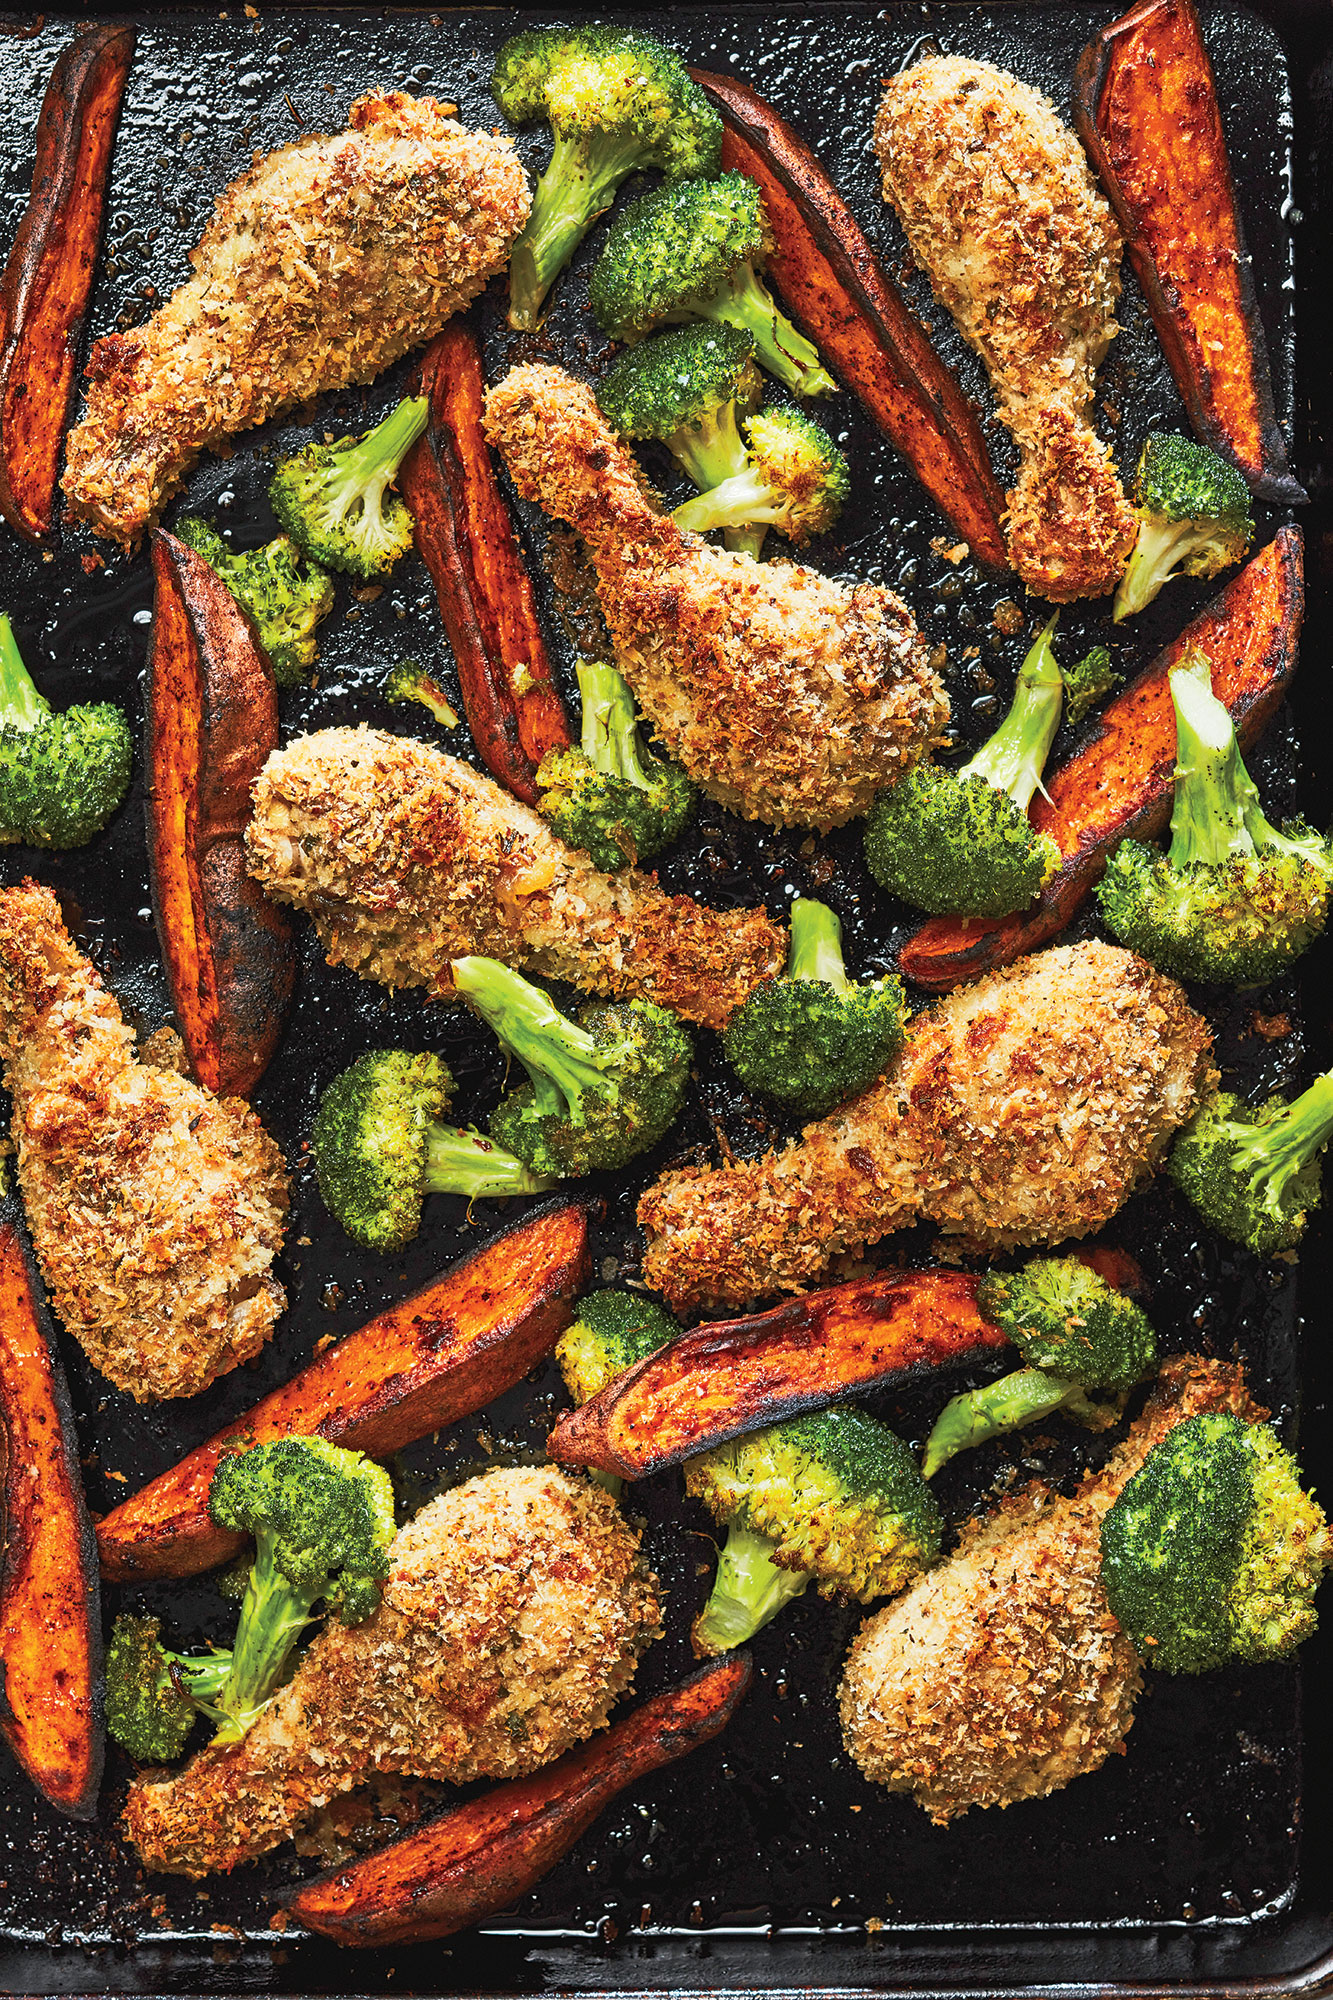 Sheet Pan Parmesan "Fried" Chicken with Broccoli and Sweet Potato Wedges